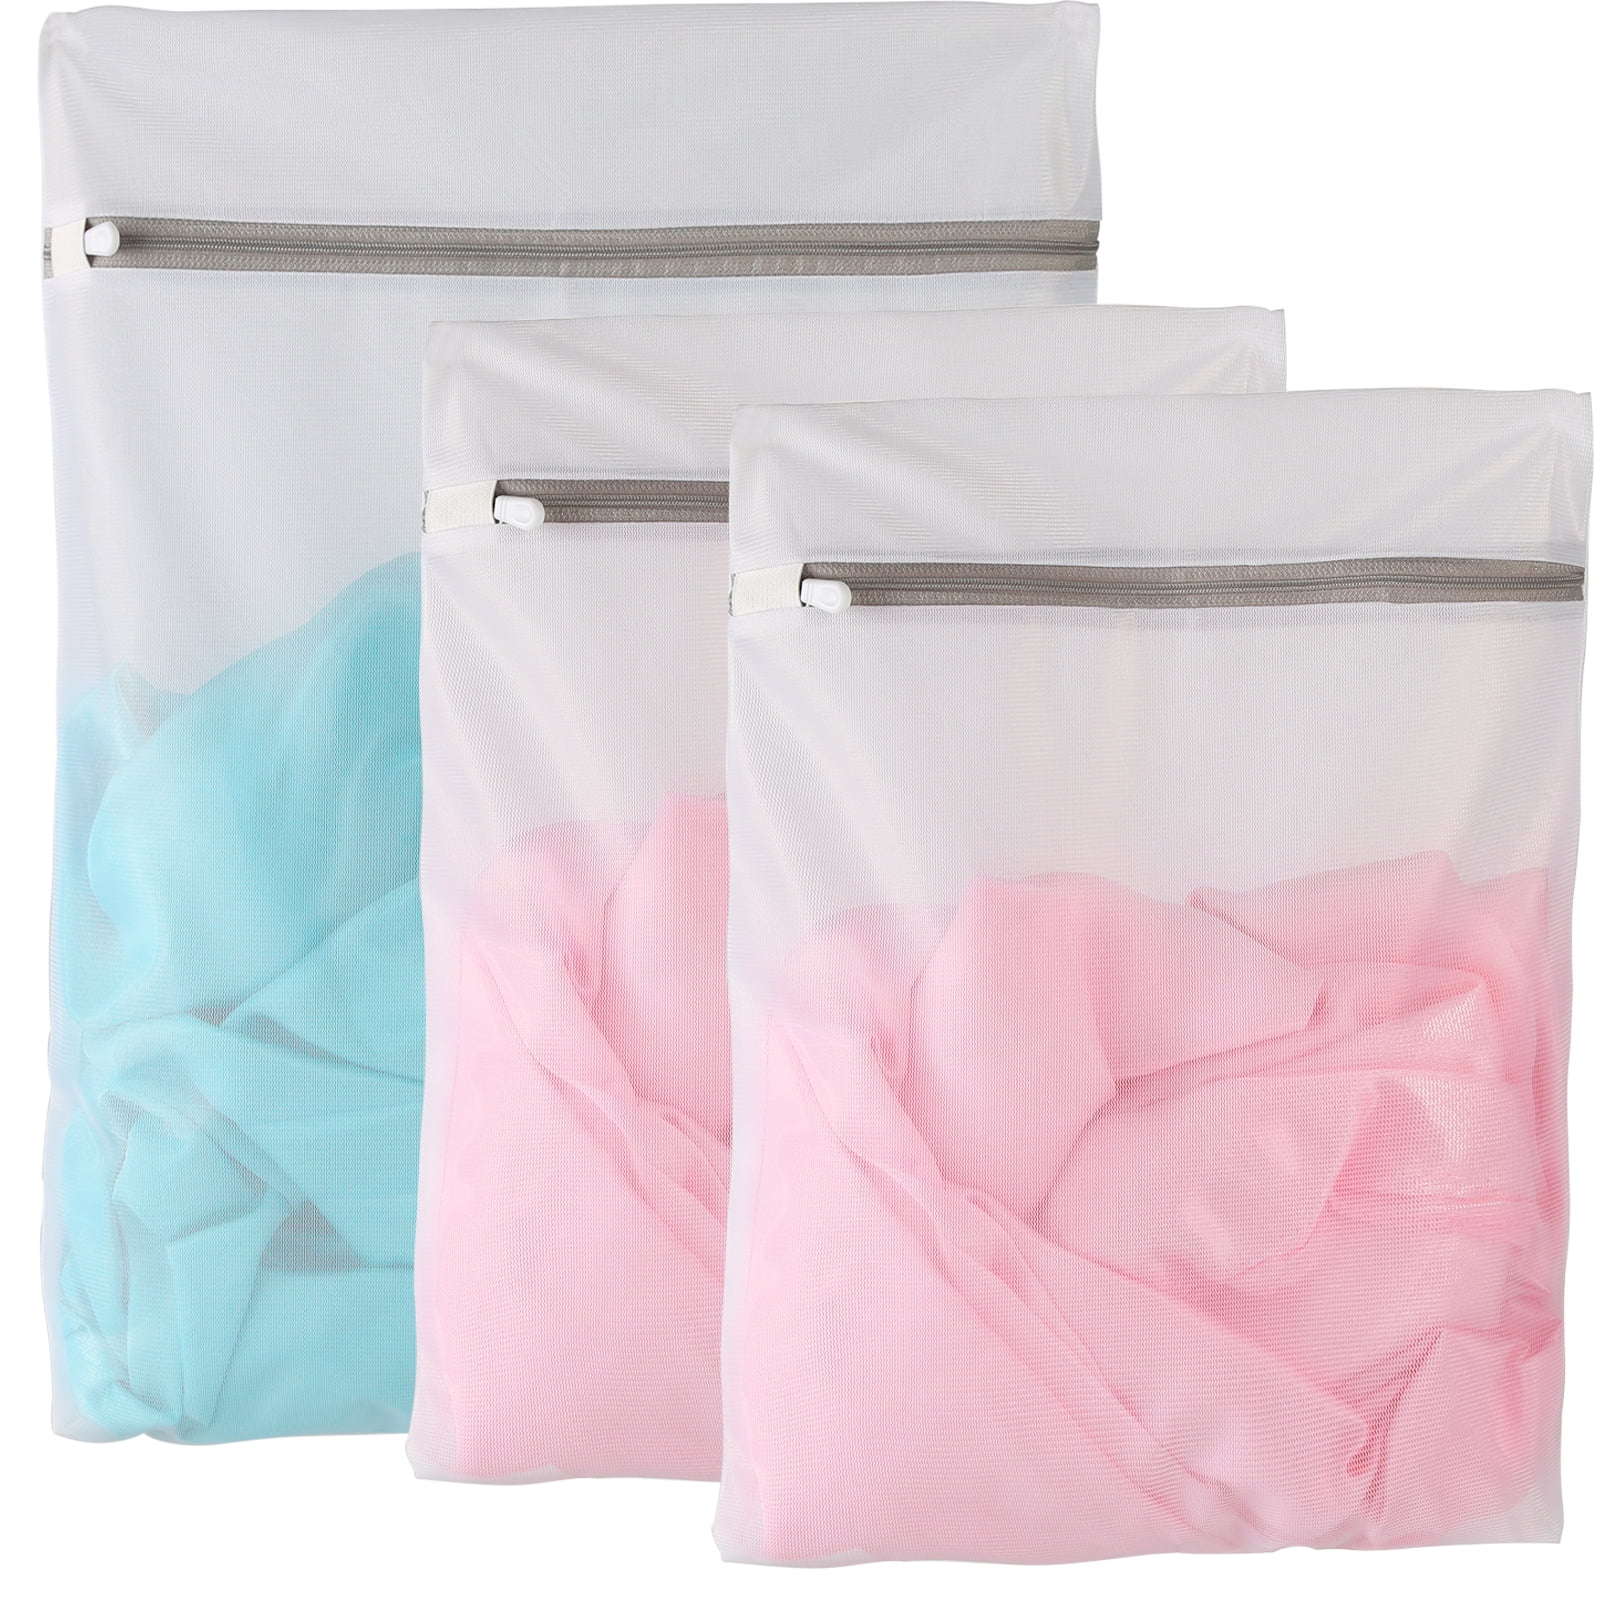 3Pcs Mesh Laundry Bags for Delicates and Lingerie - Fine Mesh - 2 Large ...